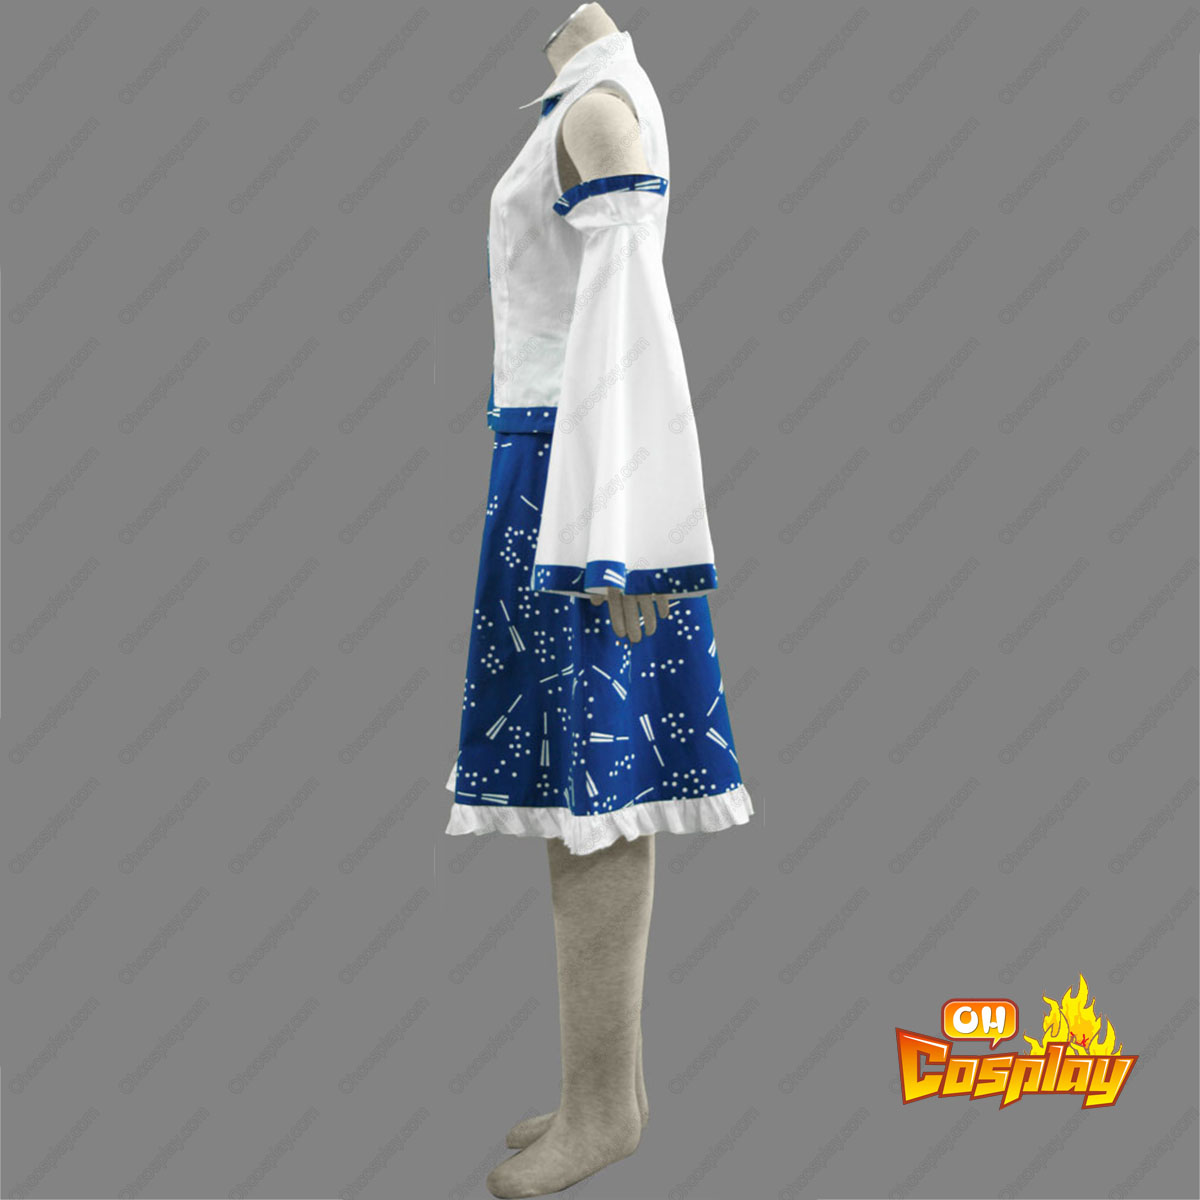 Touhou Project Kochiya Sanae Cosplay Costumes Deluxe Edition